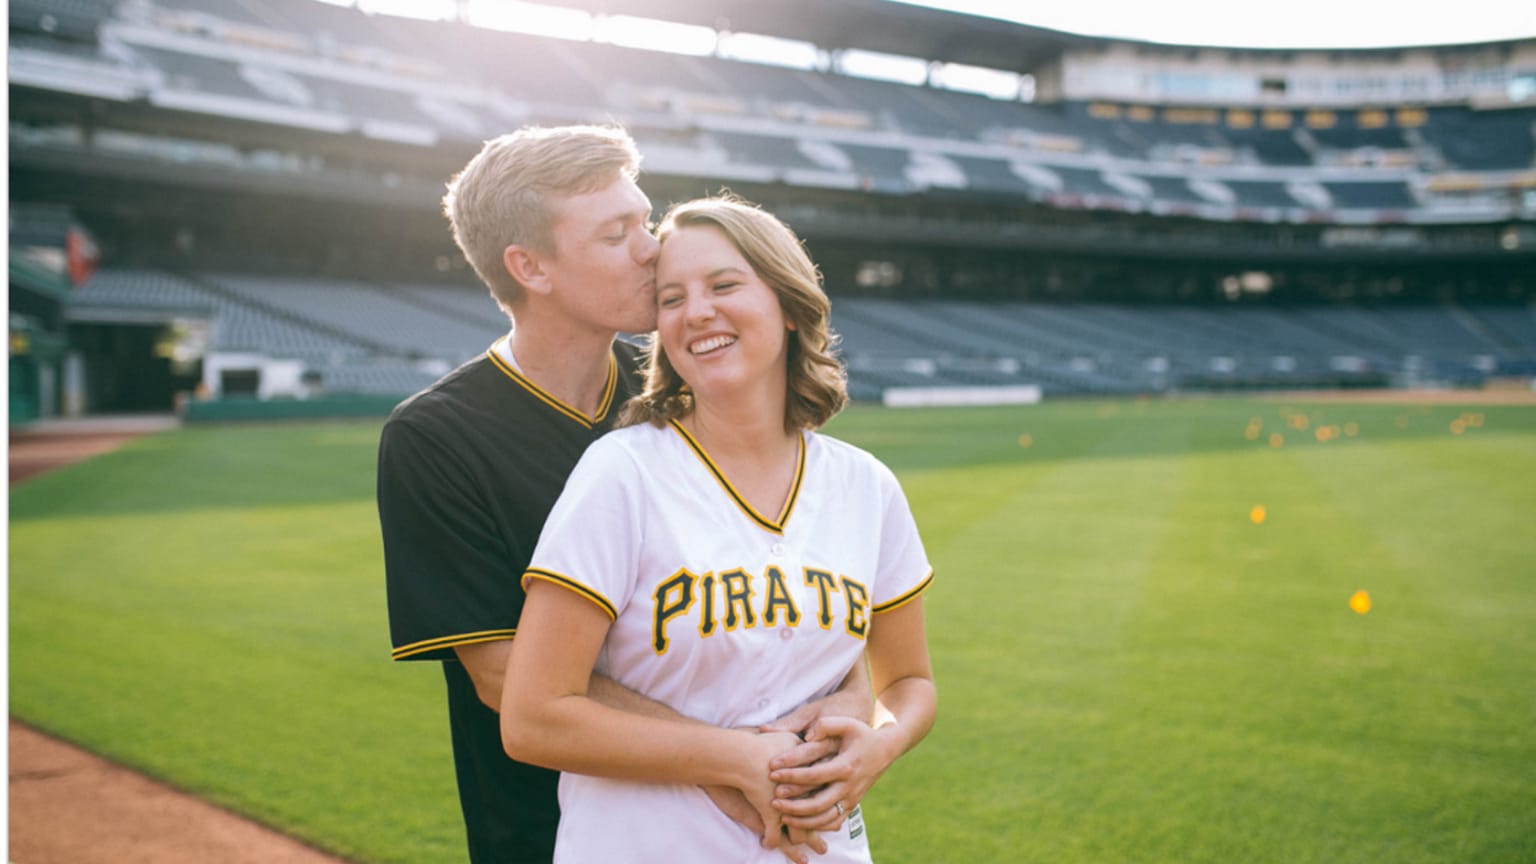 Marriage and Baseball: What's It Like For the Wives of Pittsburgh Pirates?